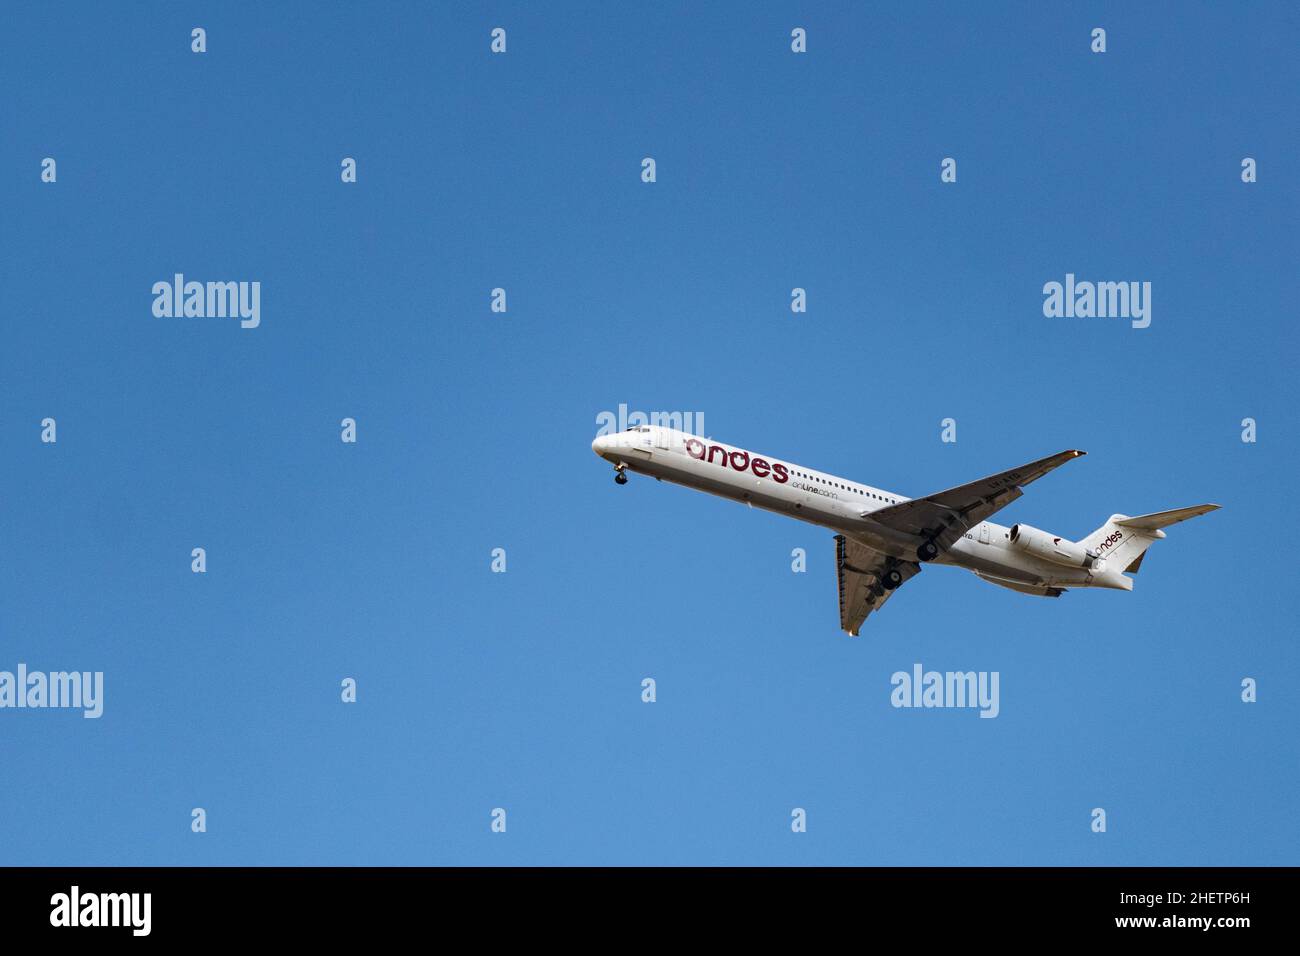 An airplane is seen flying Stock Photo